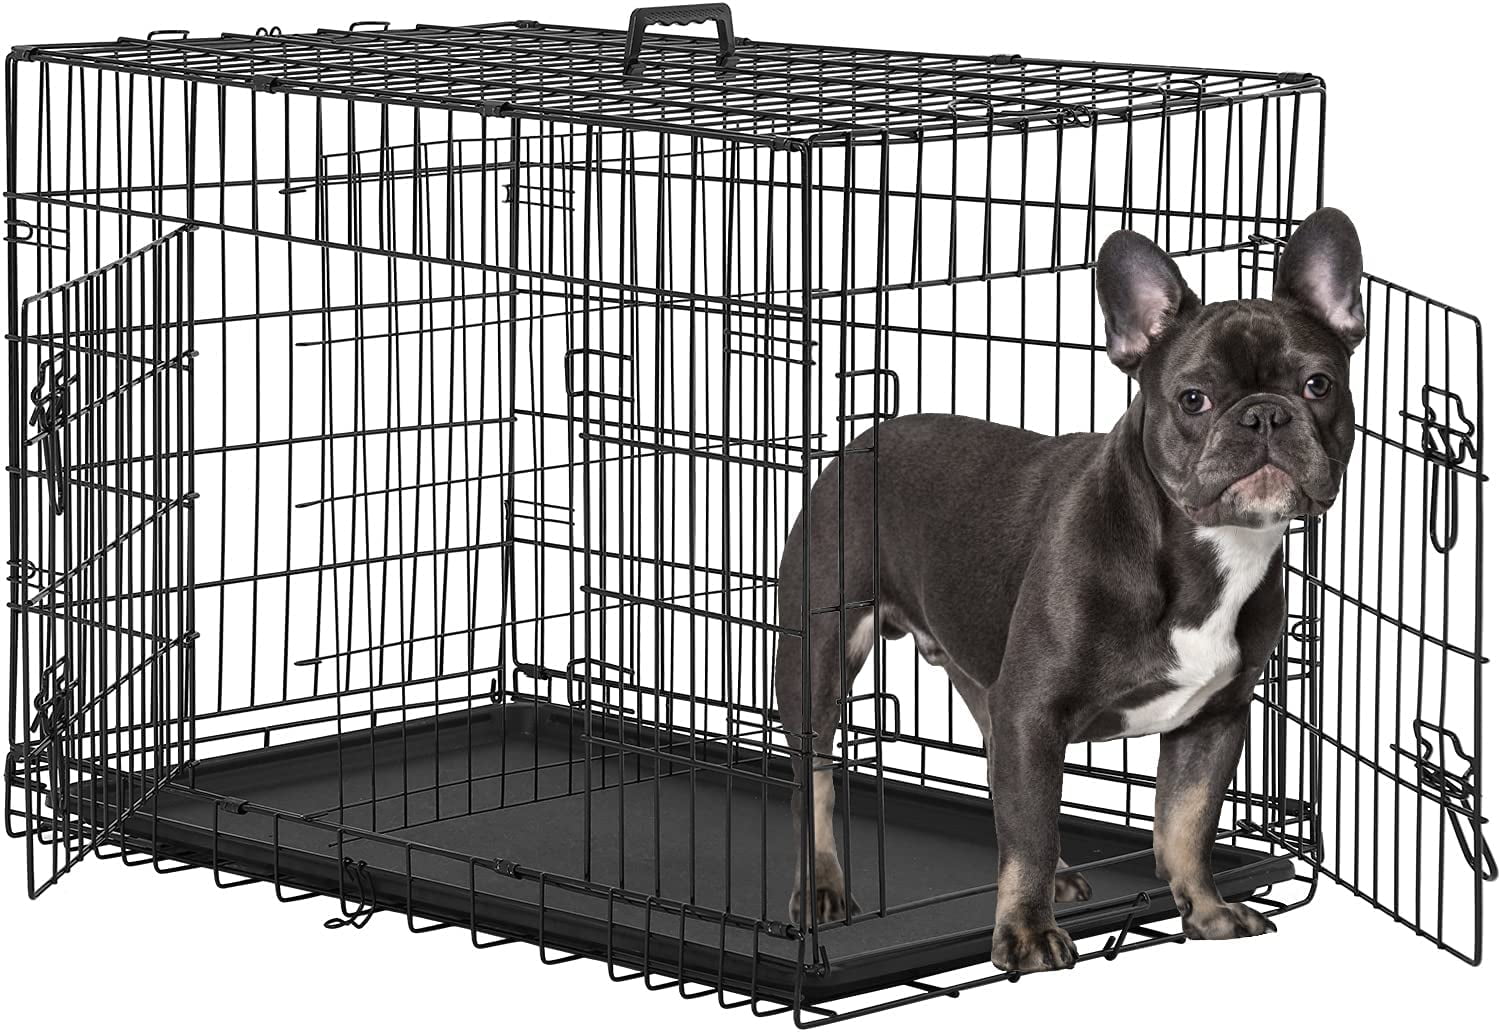 Epetlover 36 Inches Dog Crate with Double Door Tray Handle Folding Metal Cage Kennel for Small/Medium Dogs 